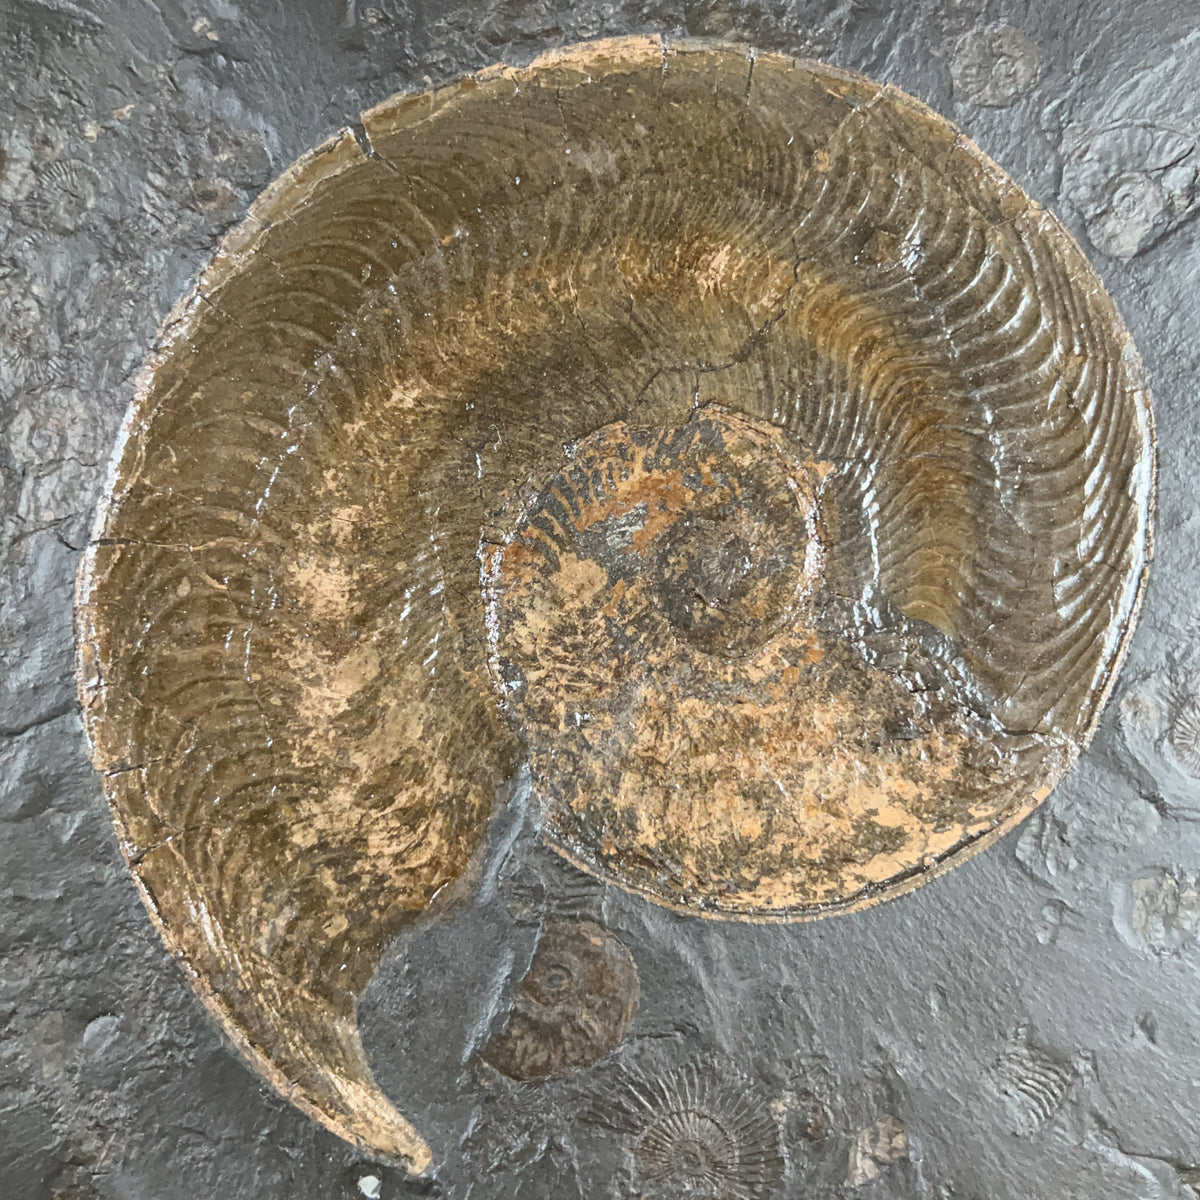 Close Up of Pyritized Harpoceras Ammonite Fossil